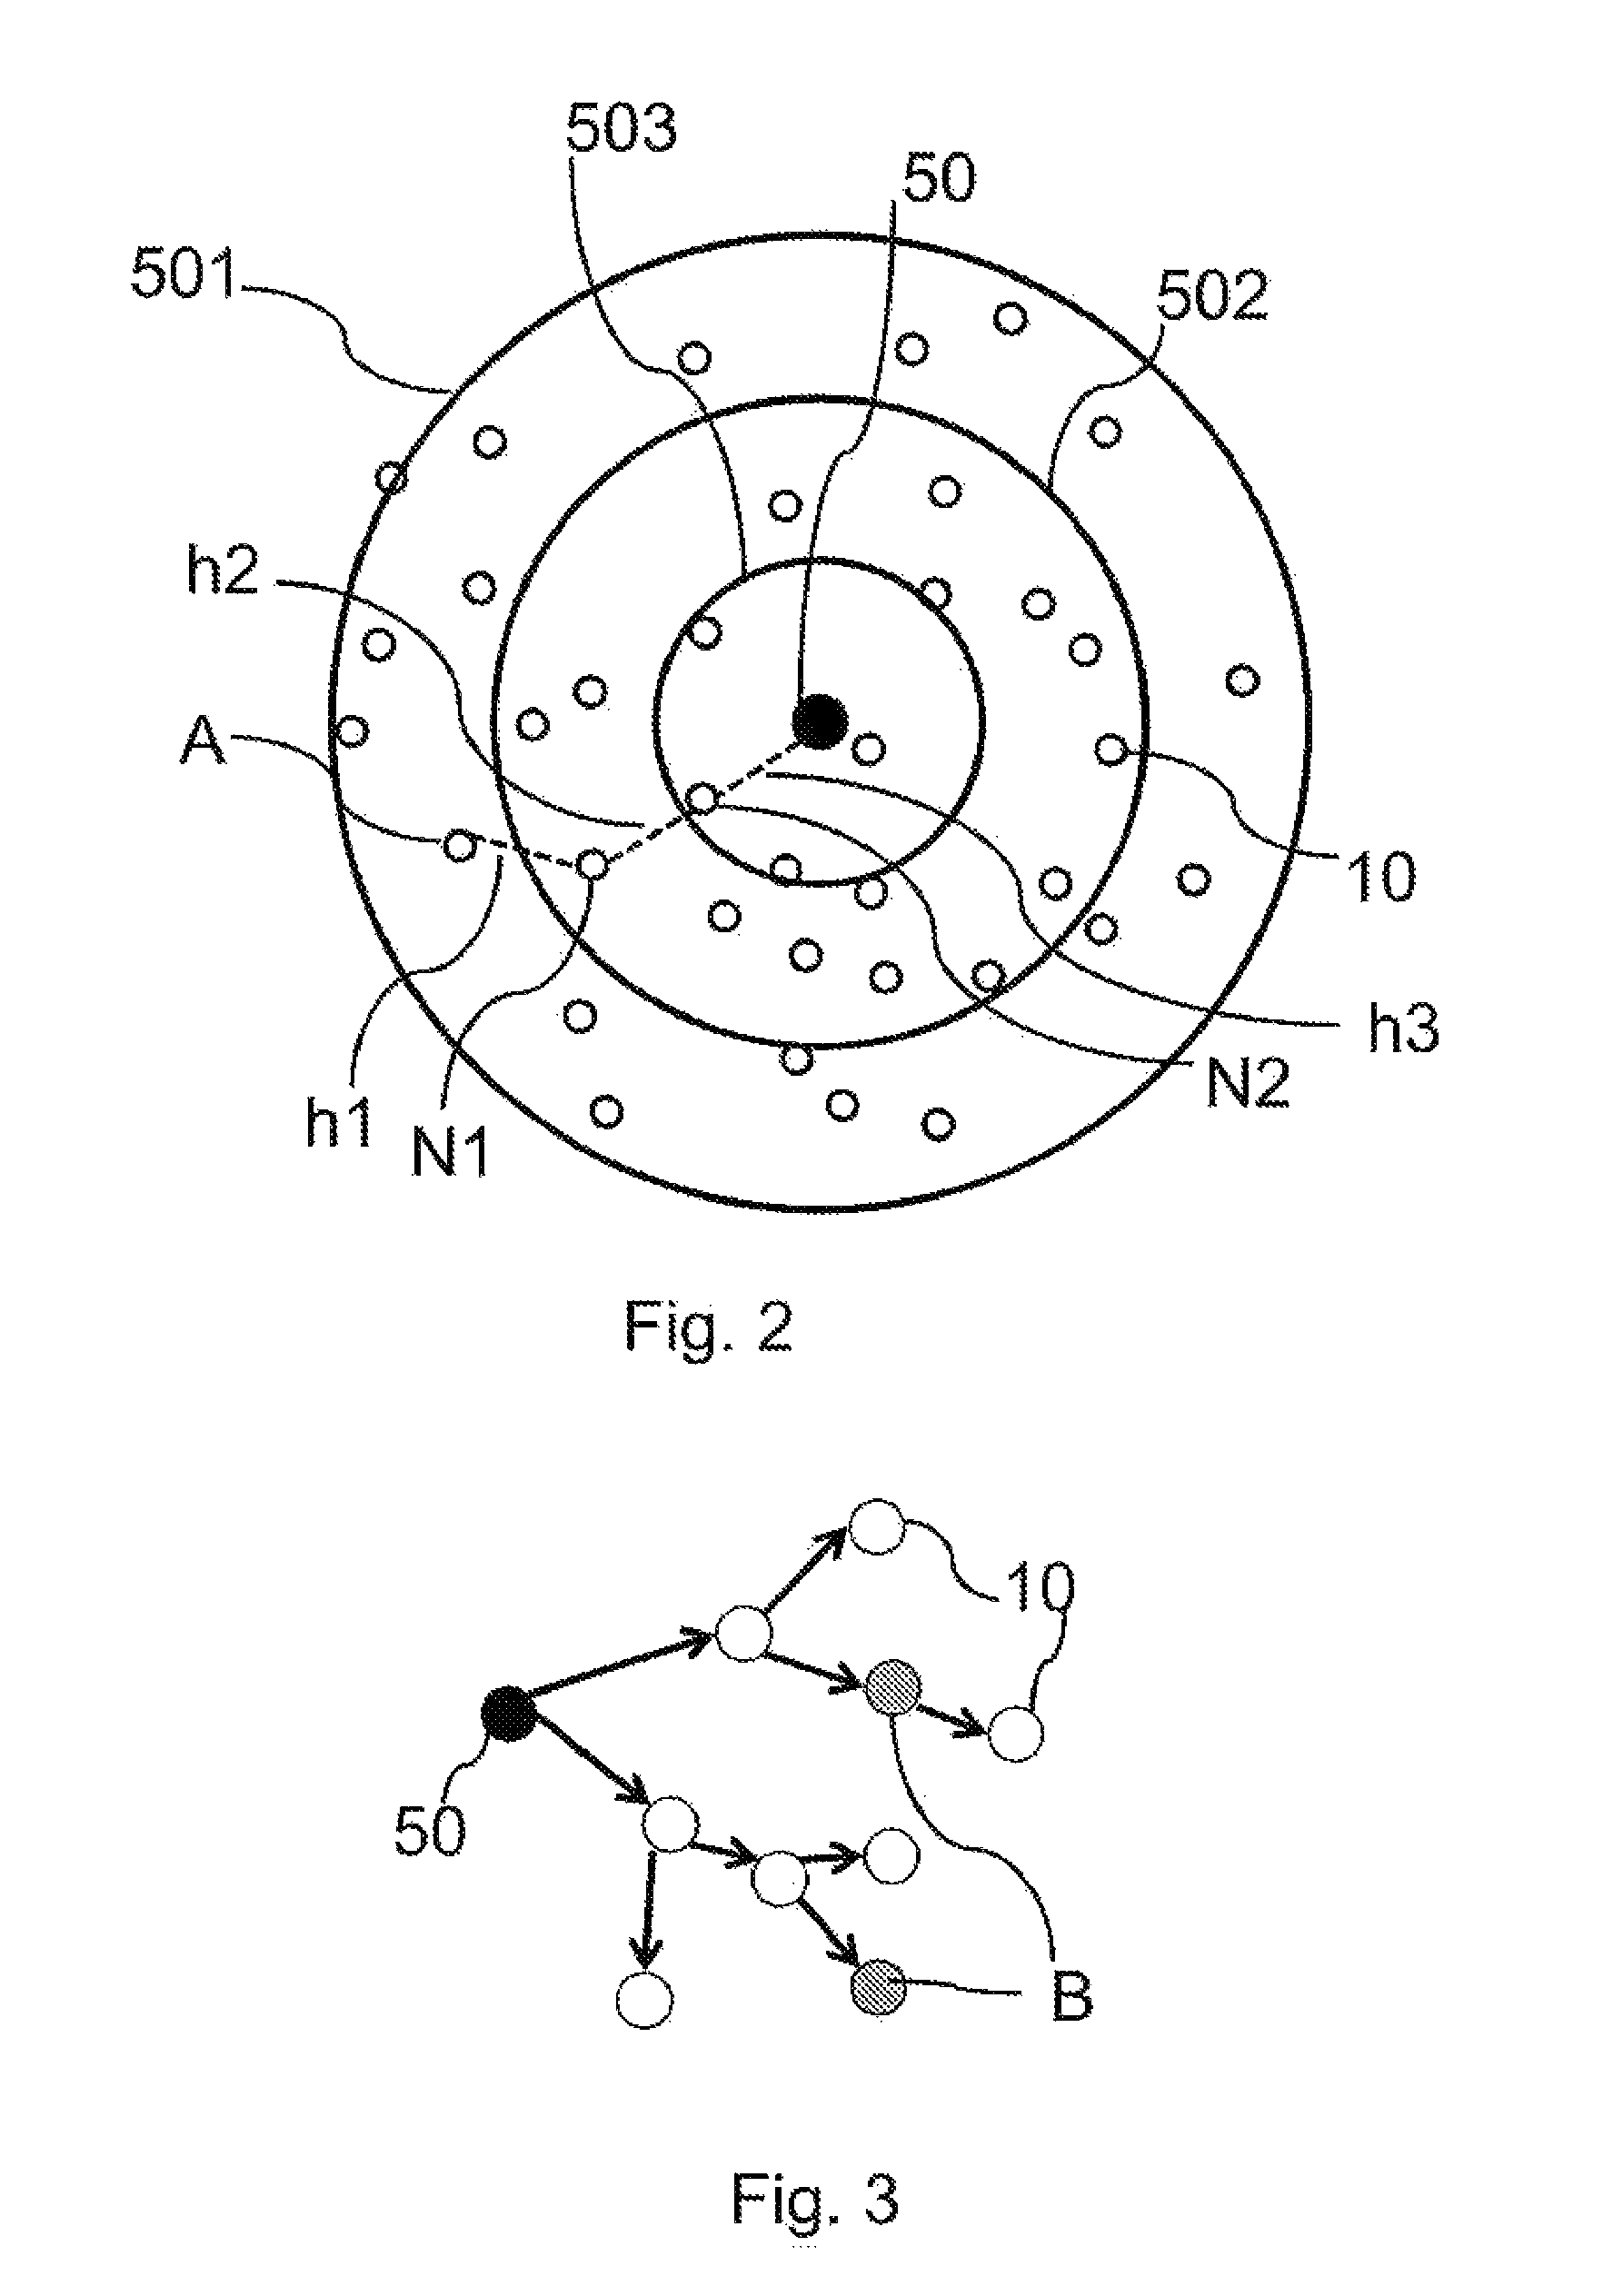 System and method for optimizing data transmission to nodes of a wireless mesh network